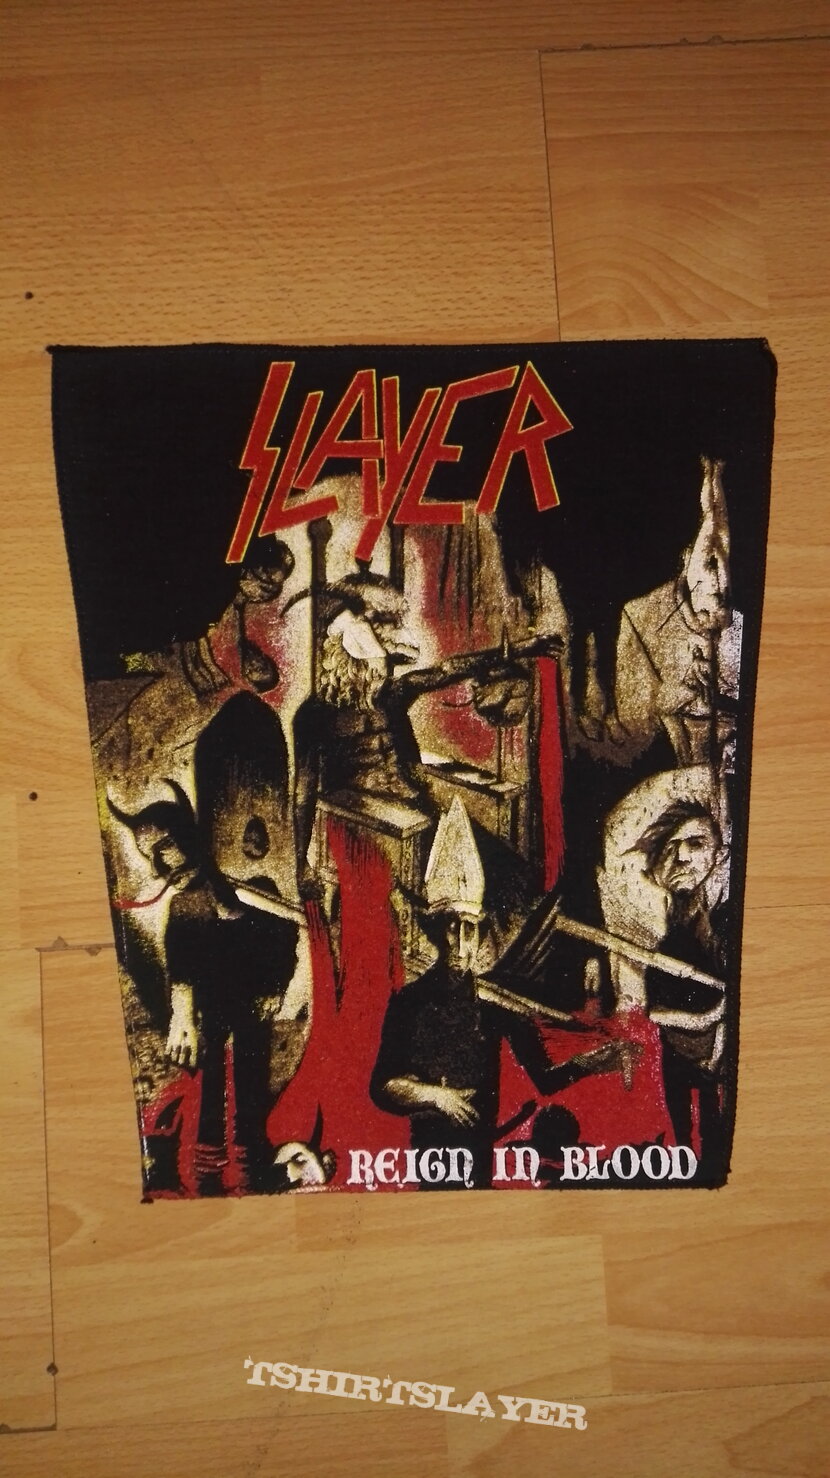 Late 80's Slayer 'Reign In Blood' Patch